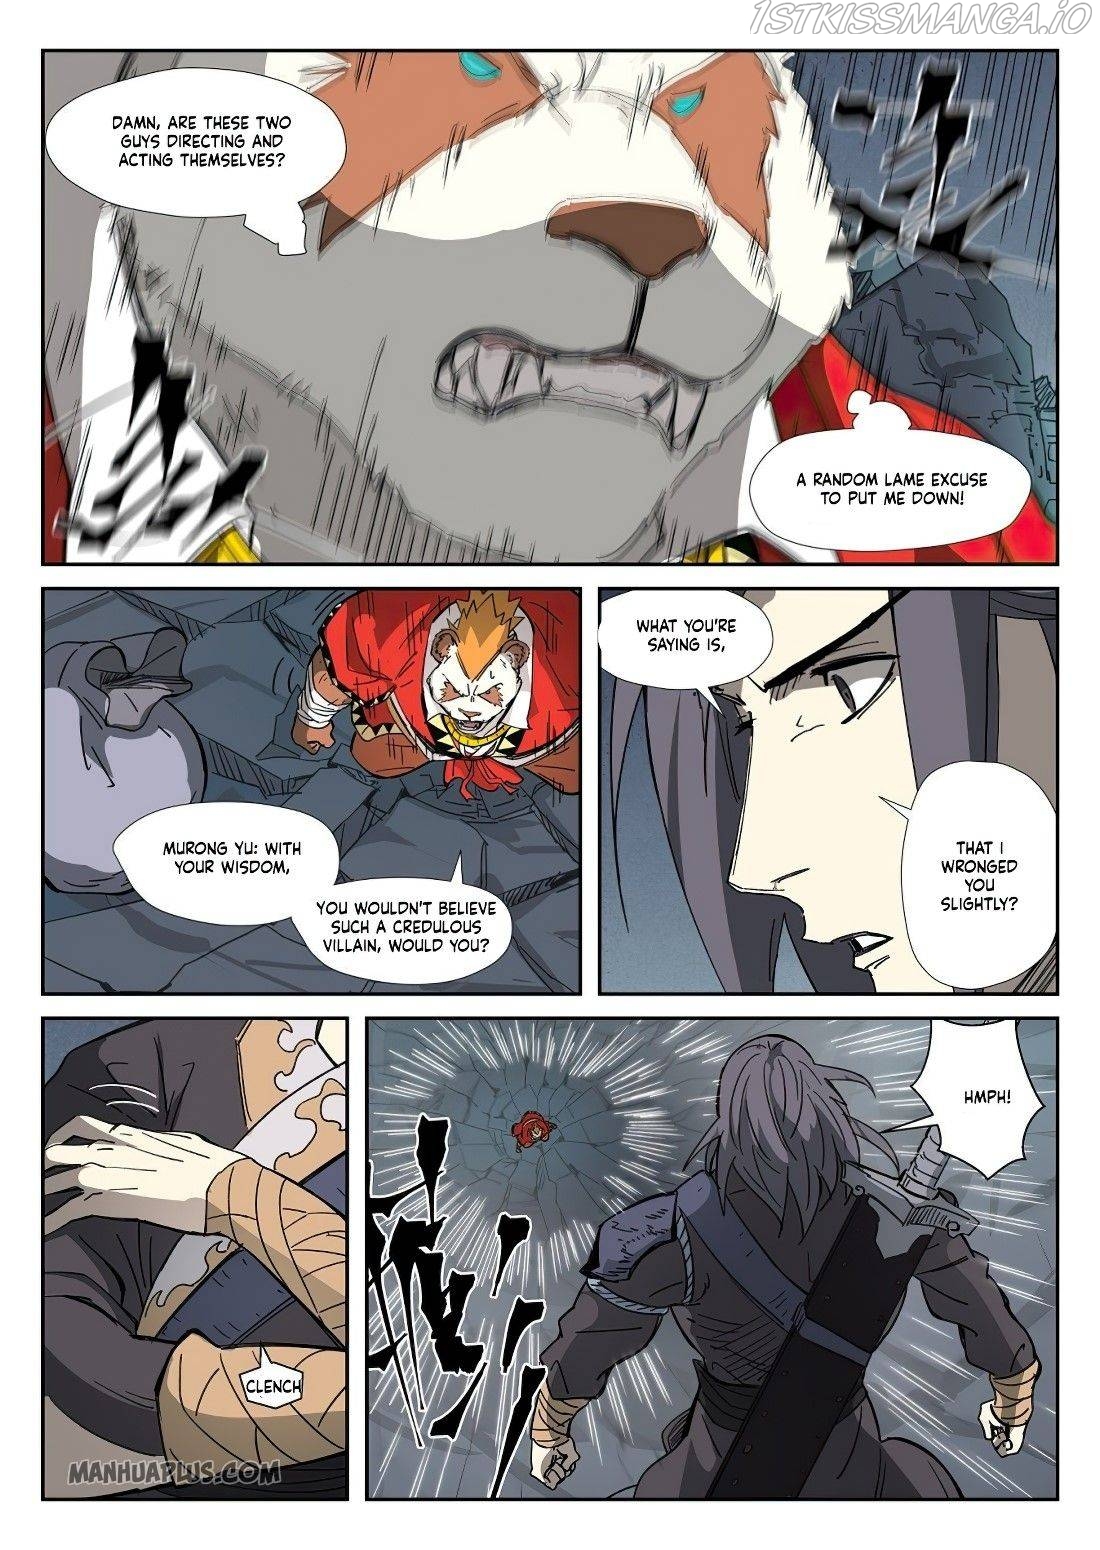 Tales of Demons and Gods Manhua Chapter 325.5 - Page 2